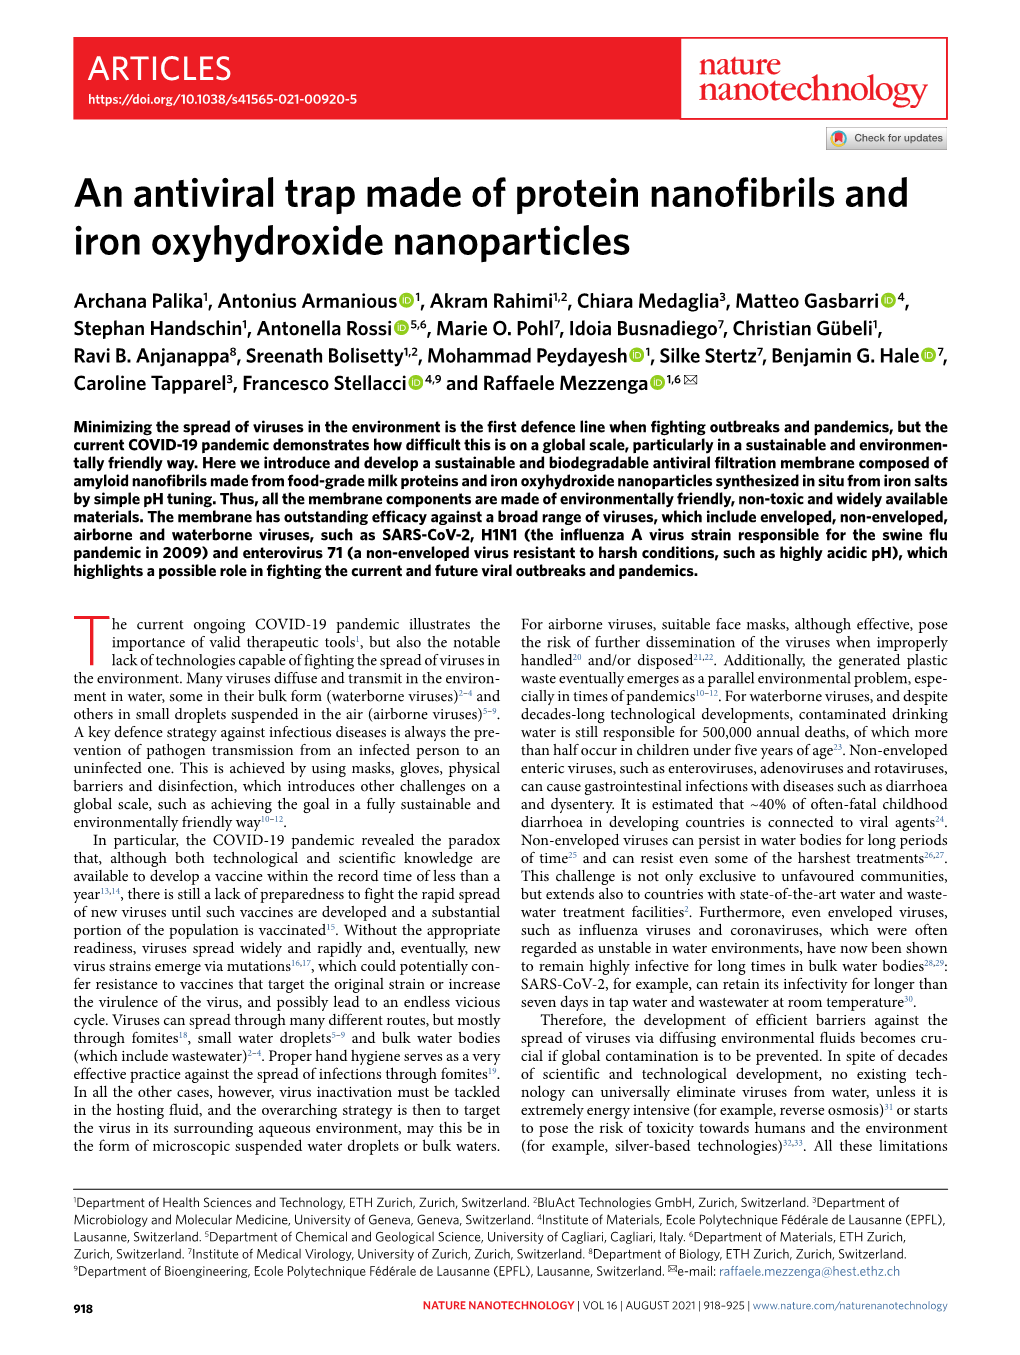 An Antiviral Trap Made of Protein Nanofibrils and Iron Oxyhydroxide Nanoparticles